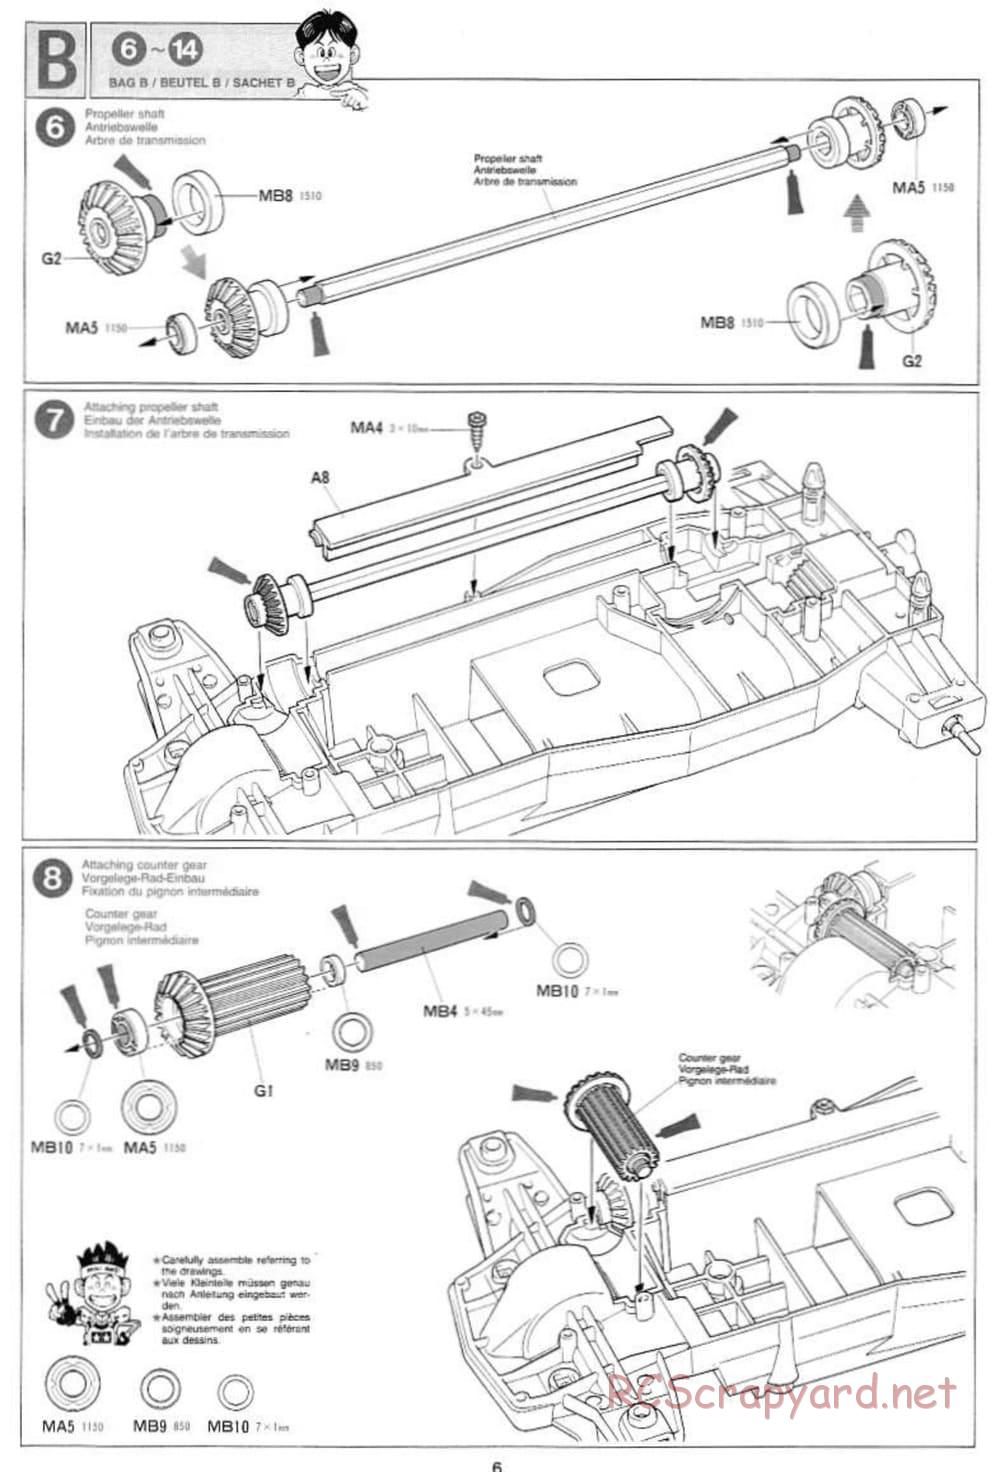 Tamiya - Wild Ceptor - Boy's 4WD Chassis - Manual - Page 6